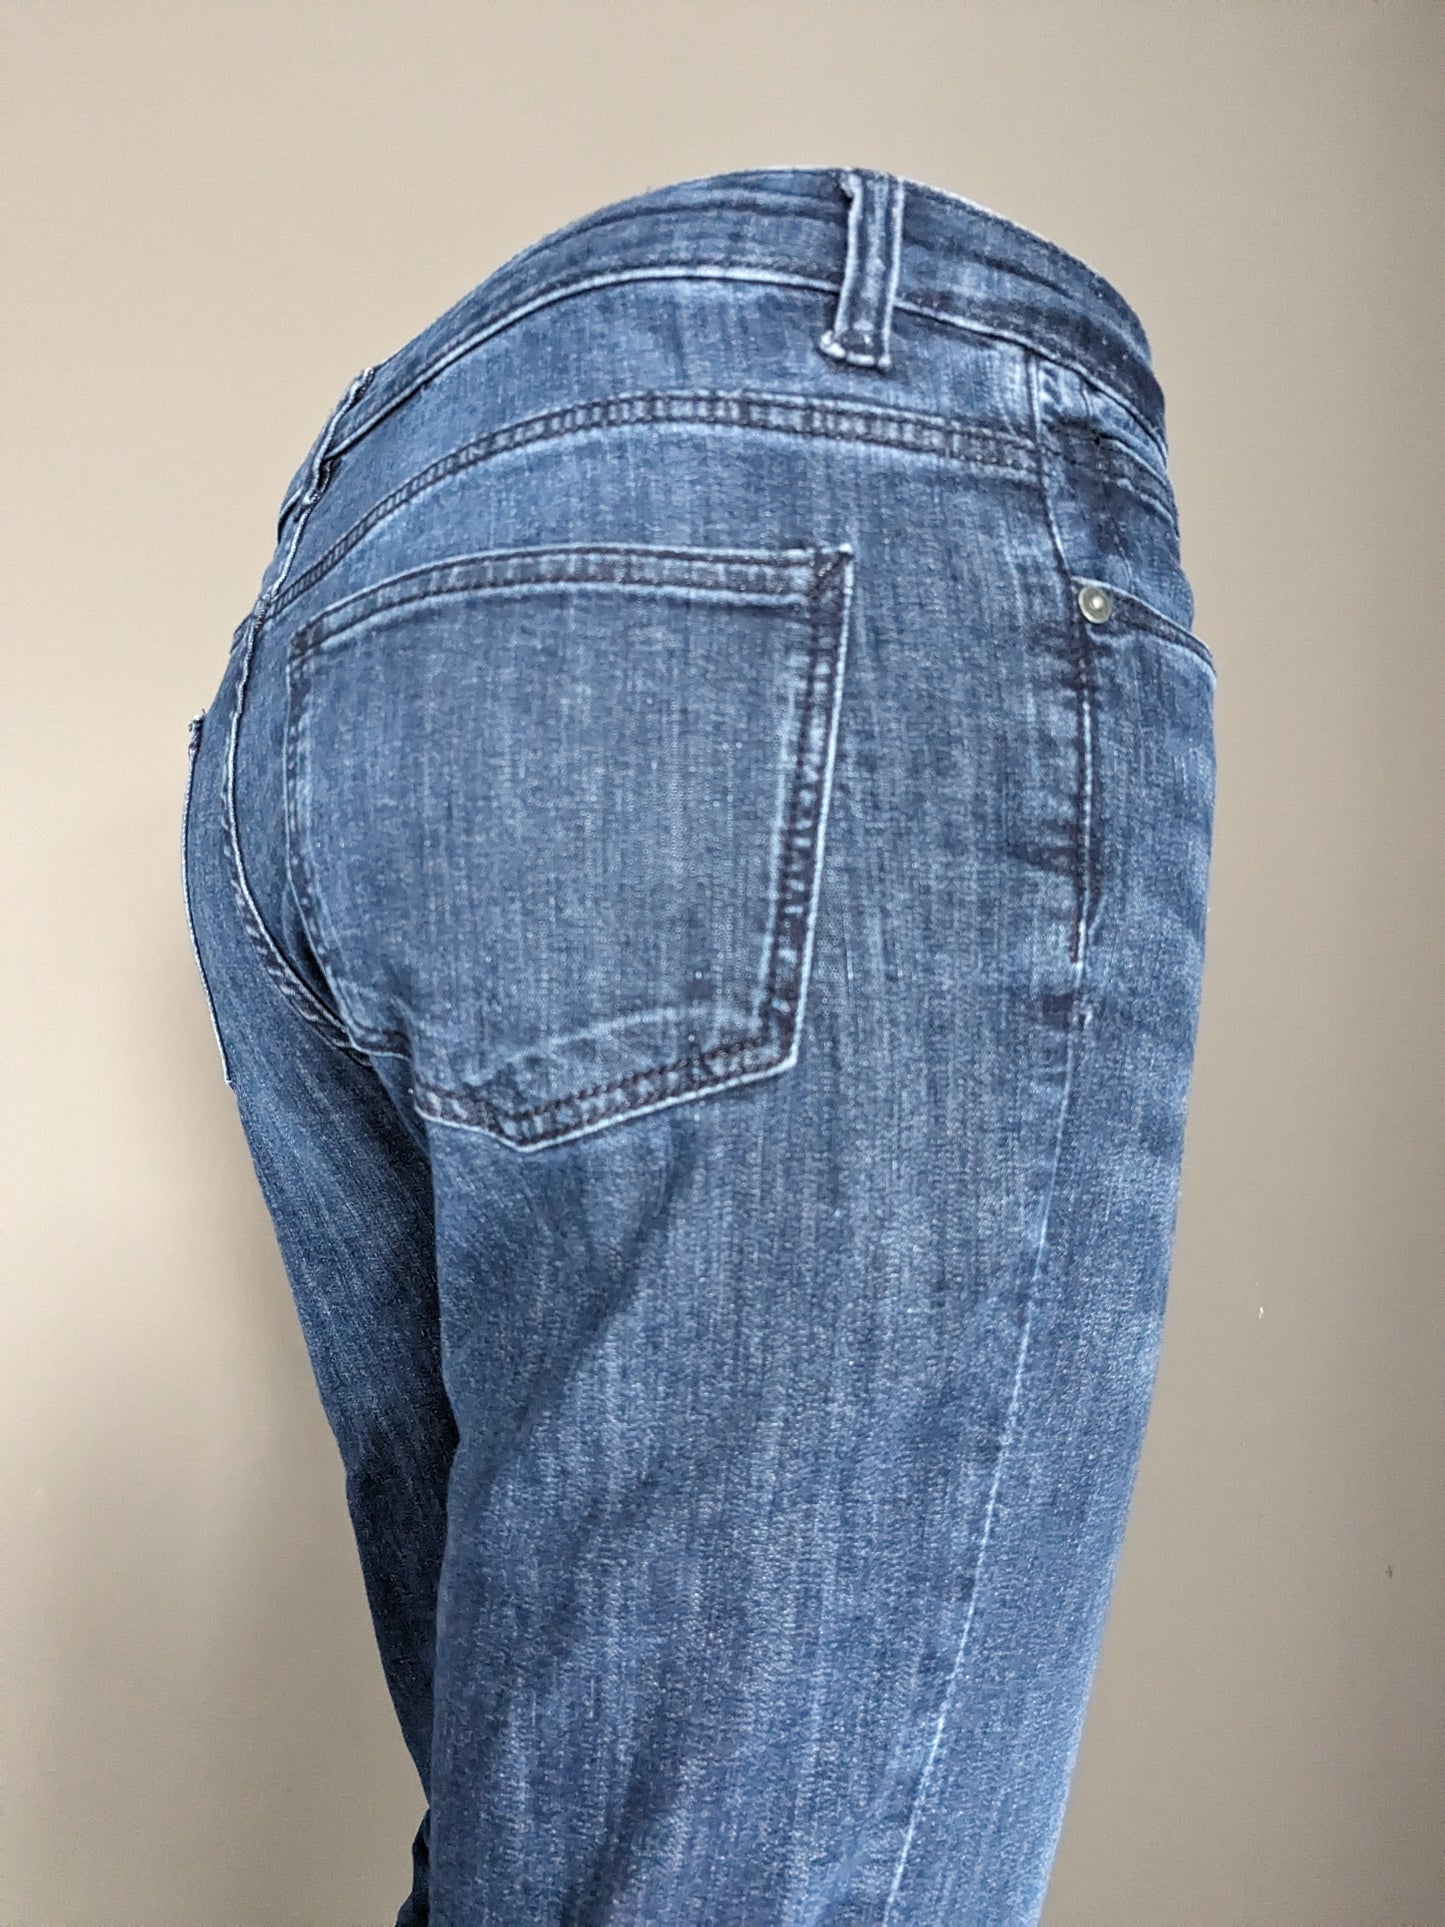 C&A jeans. Donker blauw. W29 - L32. Straight fit stretch.